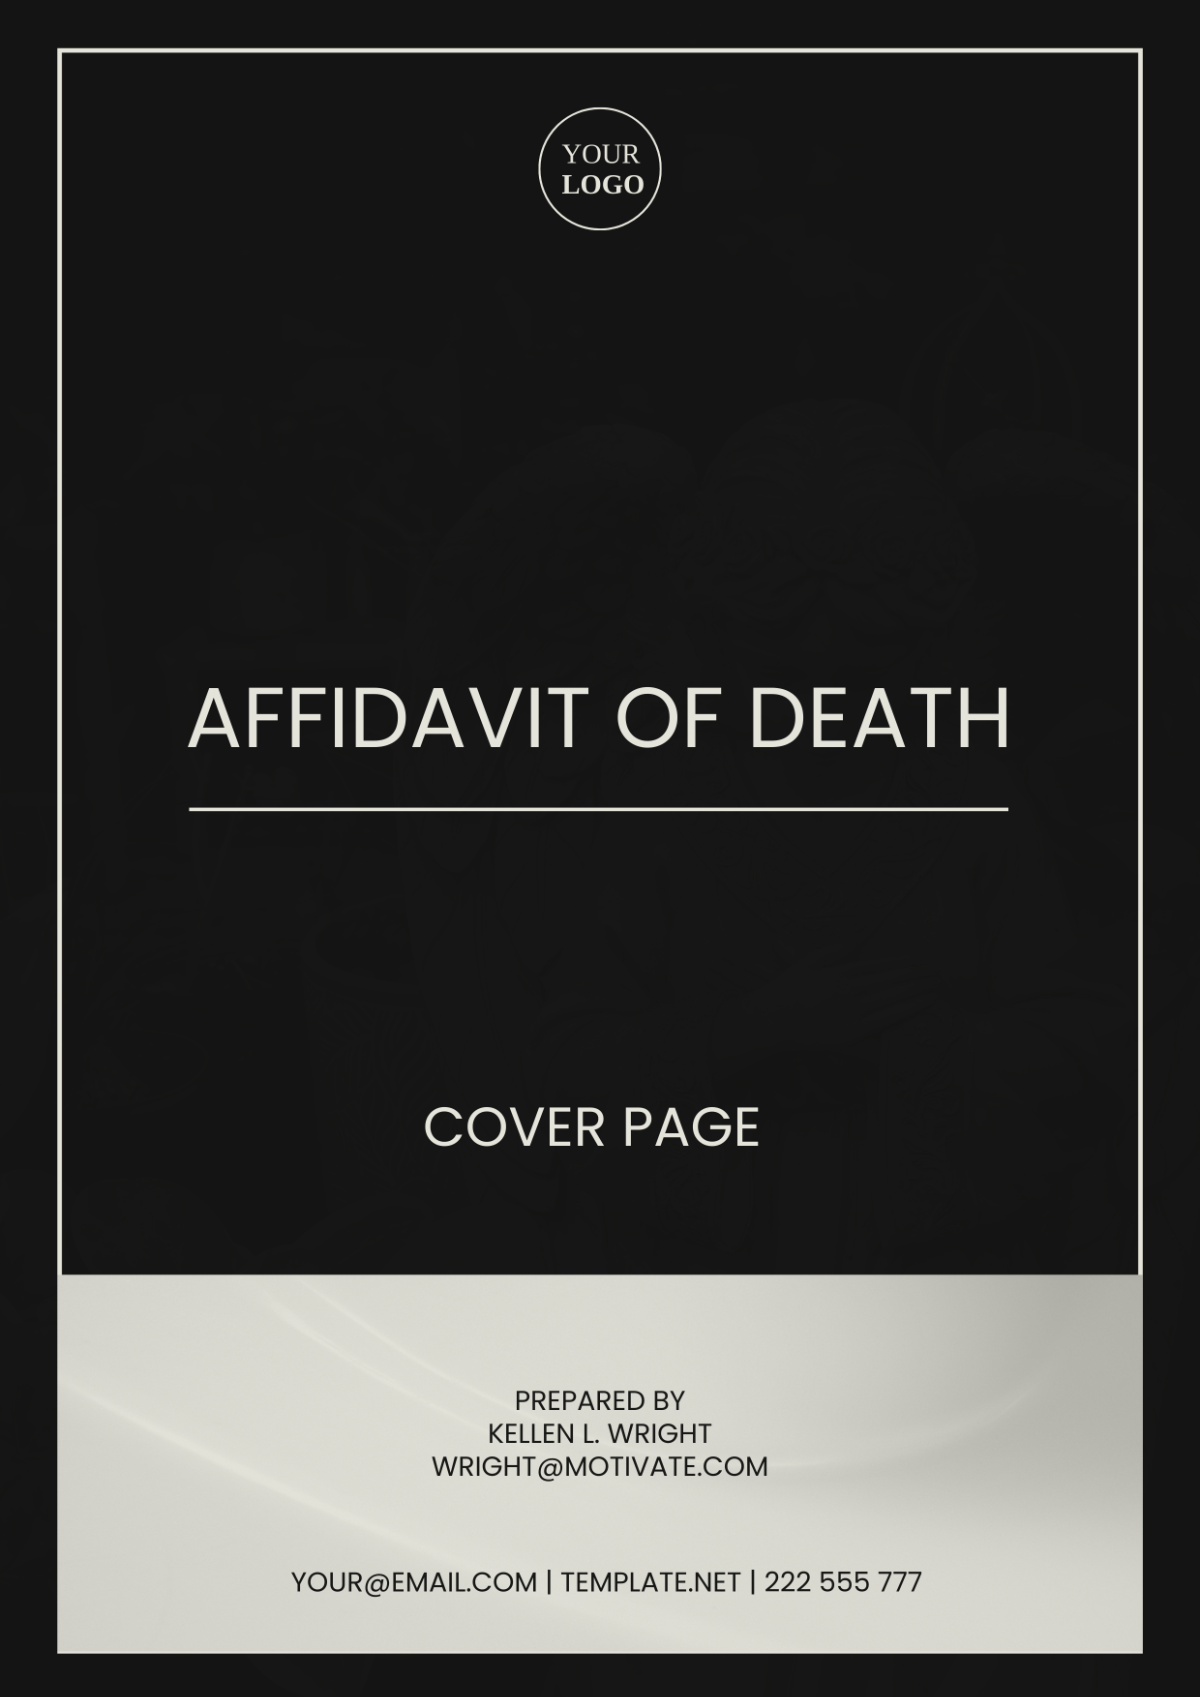 Affidavit of Death Cover Page Template